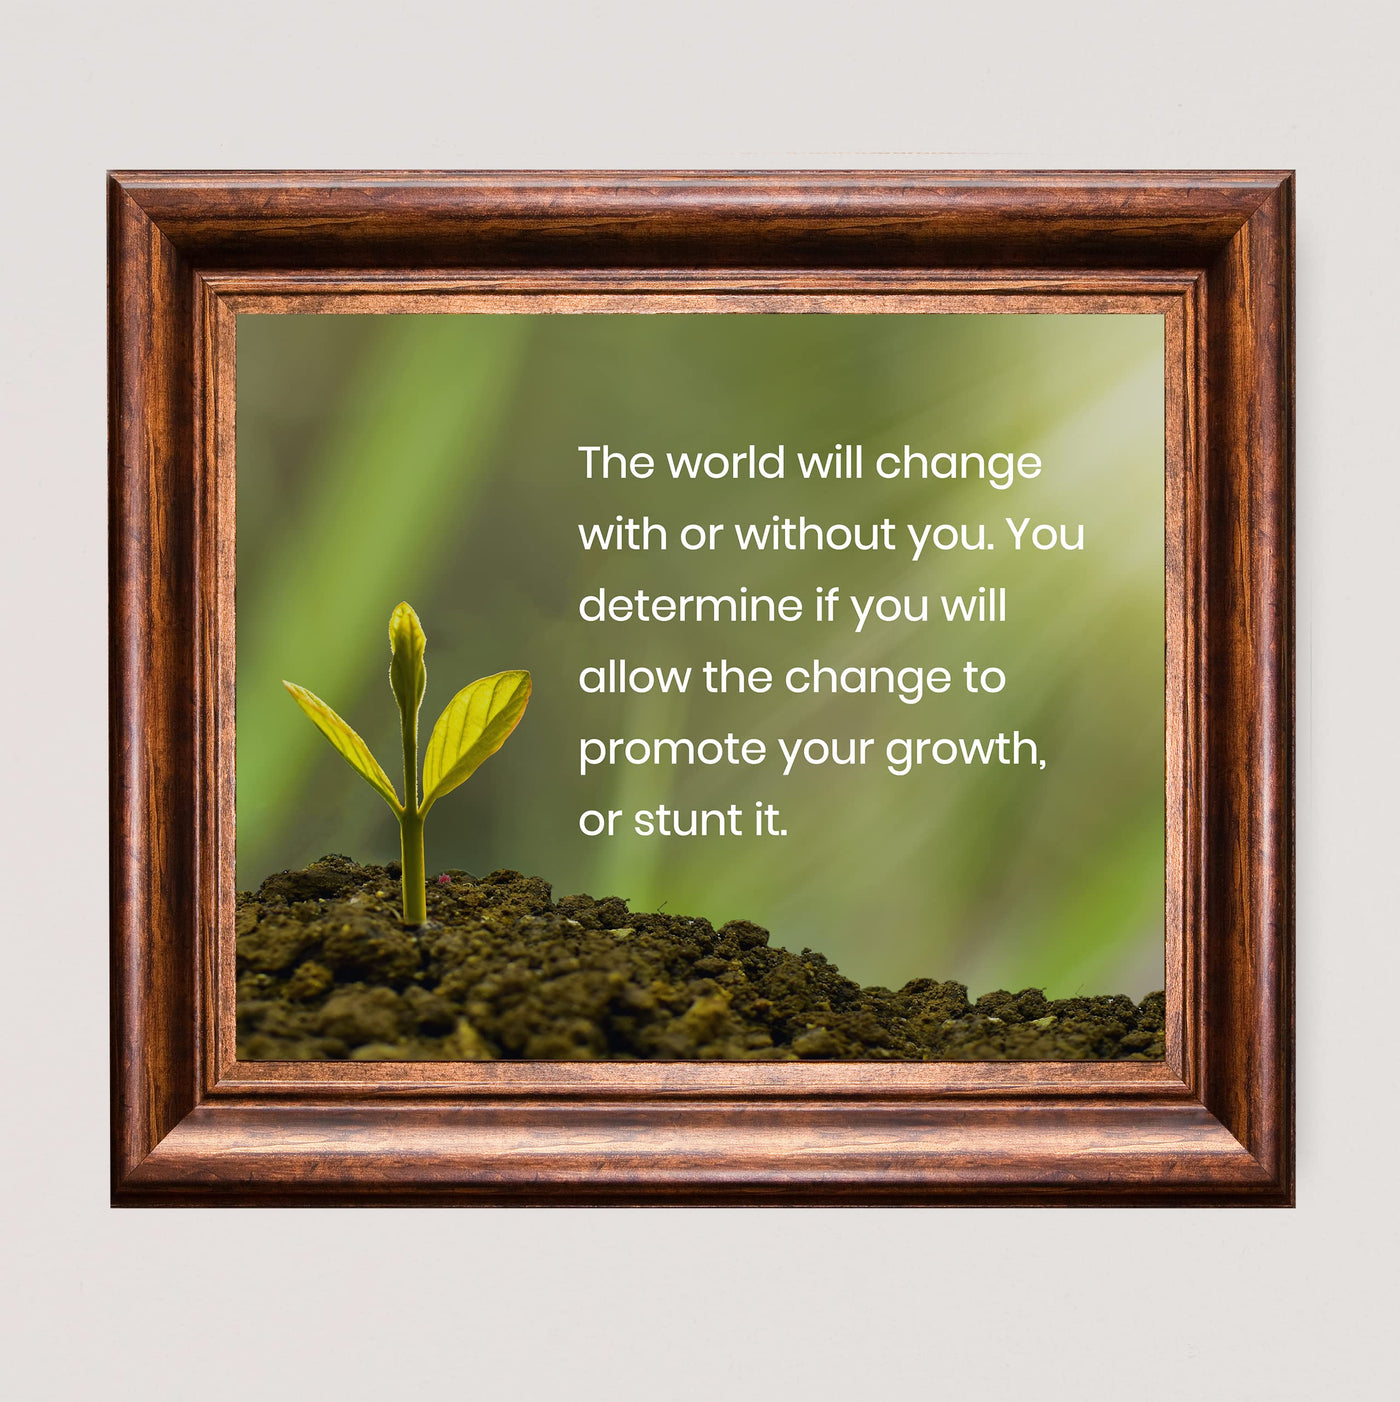 The World Will Change With or Without You Inspirational Quotes Wall Sign - 10 x 8" Motivational Plant Wall Art Print-Ready to Frame. Home-Office-School Decor. Great Advice for Positive Growth!